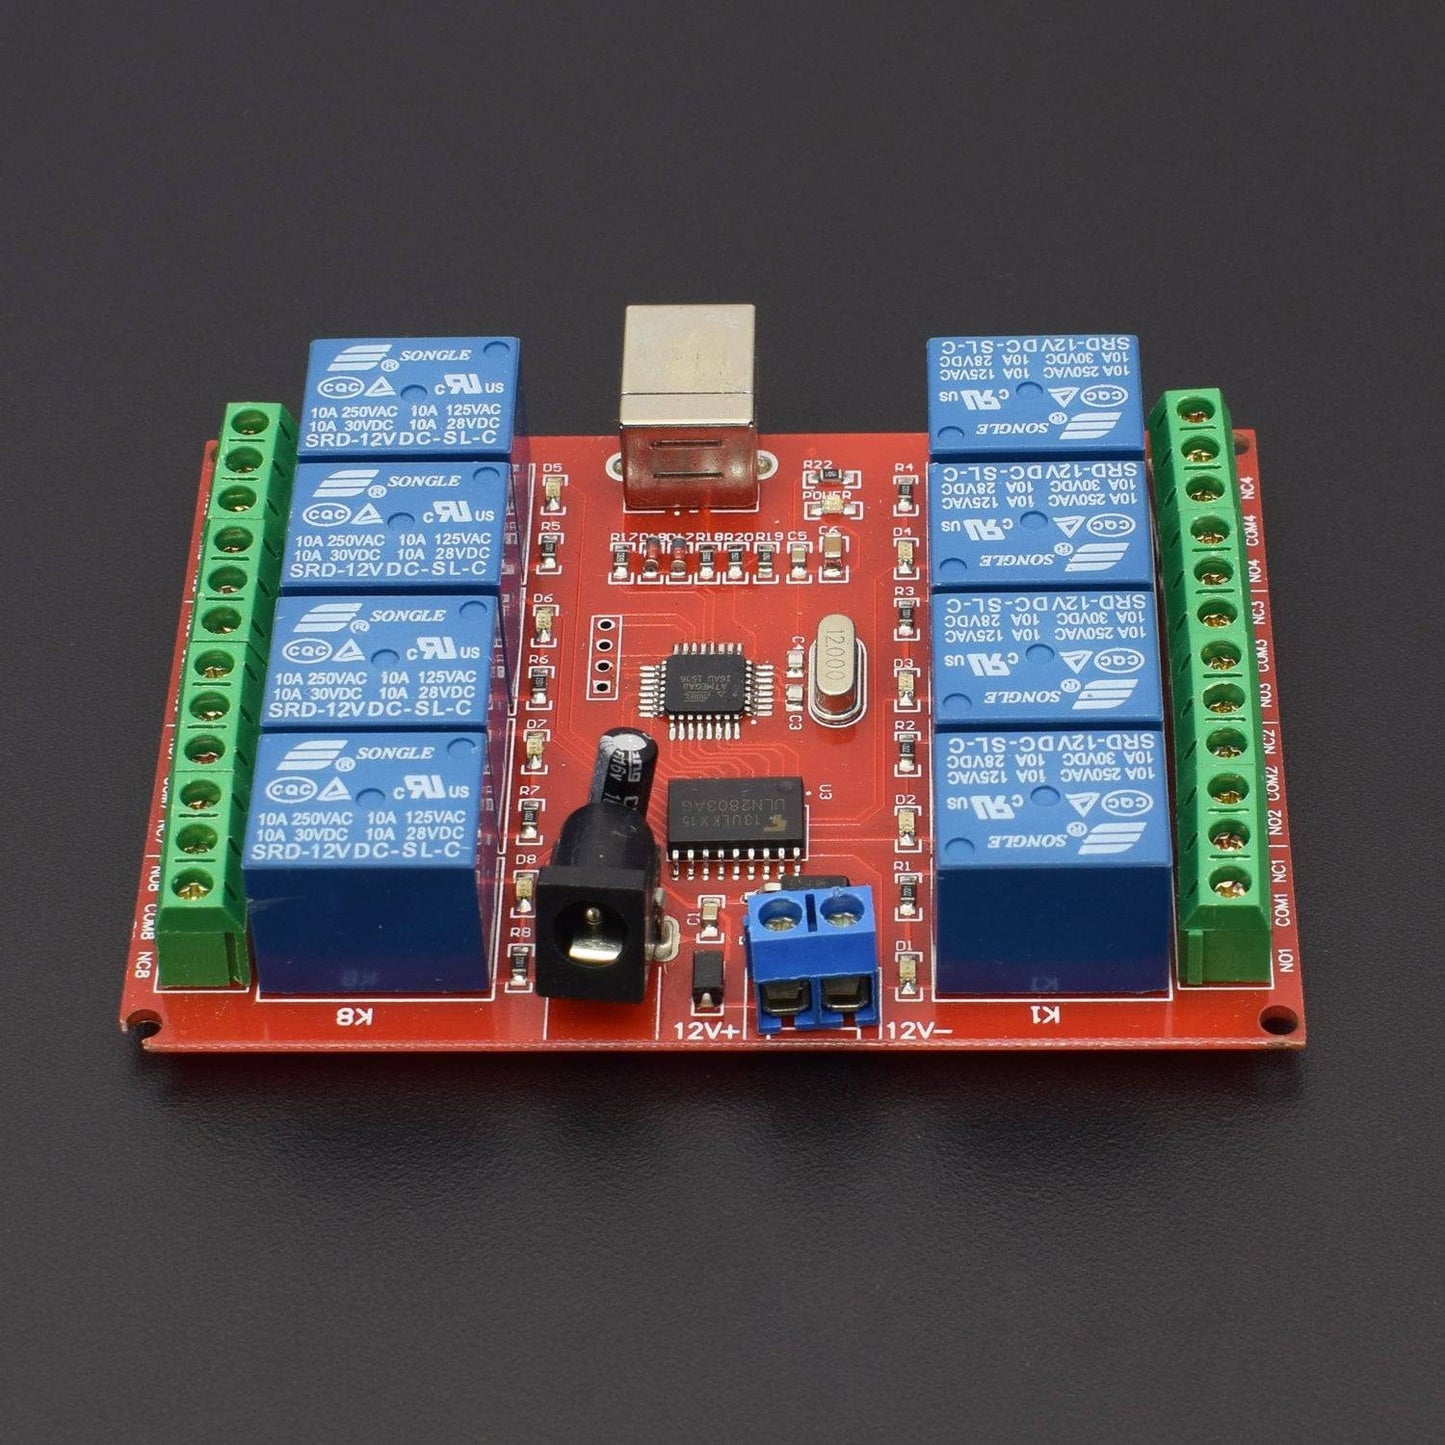 12V 8 Channel USB Relay Module Programmable Computer Control Computer USB Control Switch for Automation - NA286 - REES52